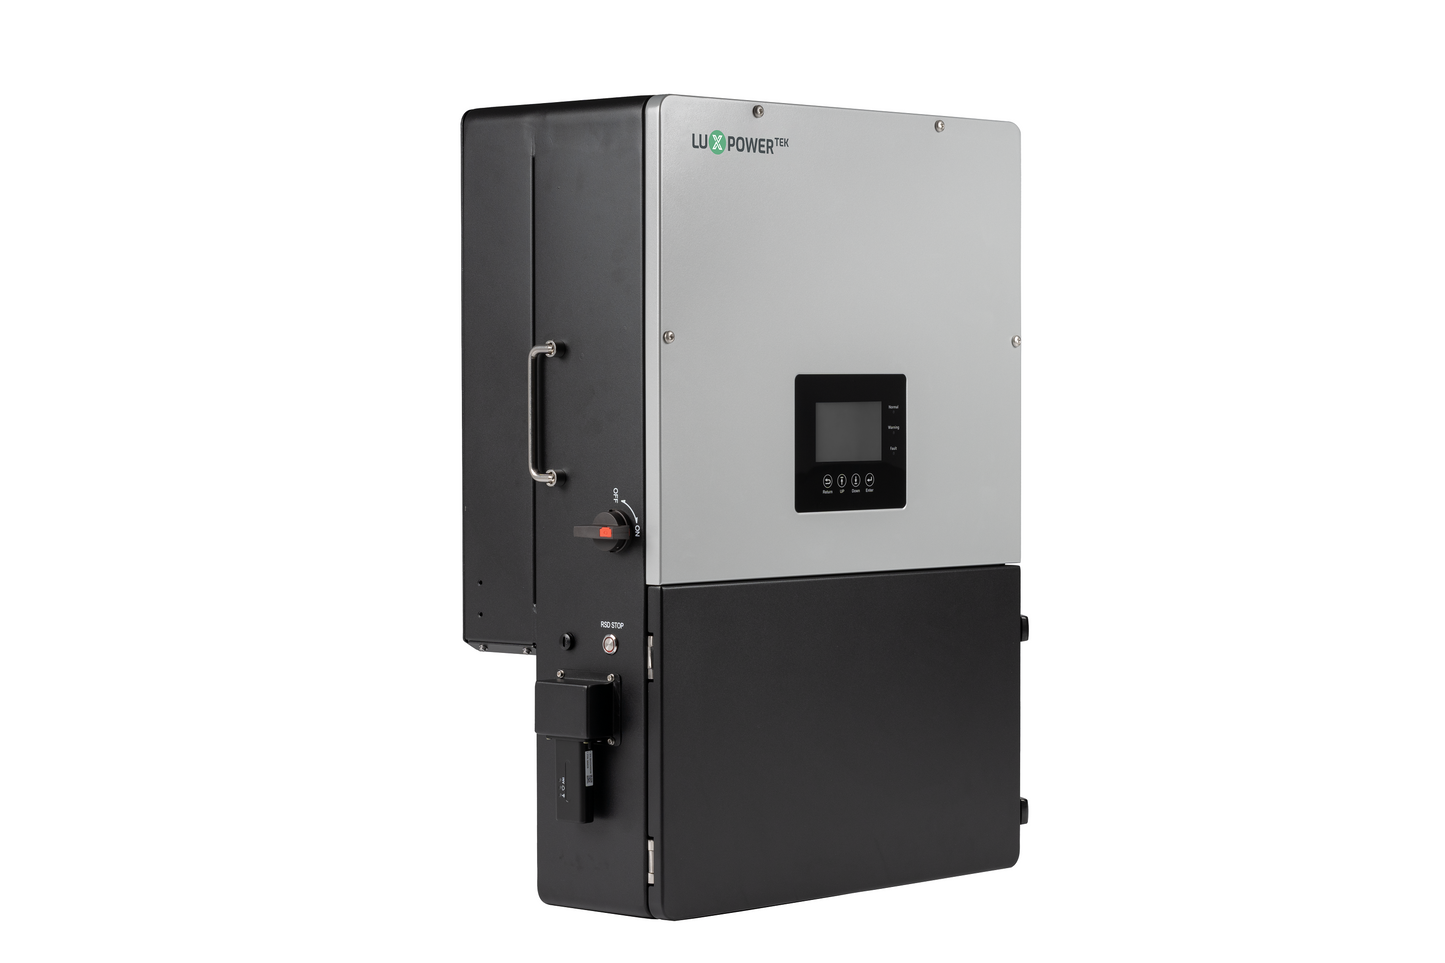 LXP-LB-US 12k | 12 KW / 6 KW to battery = 18 KW total | LuxPower | Mann Solar | Off-Grid/ Hybrid Equipment